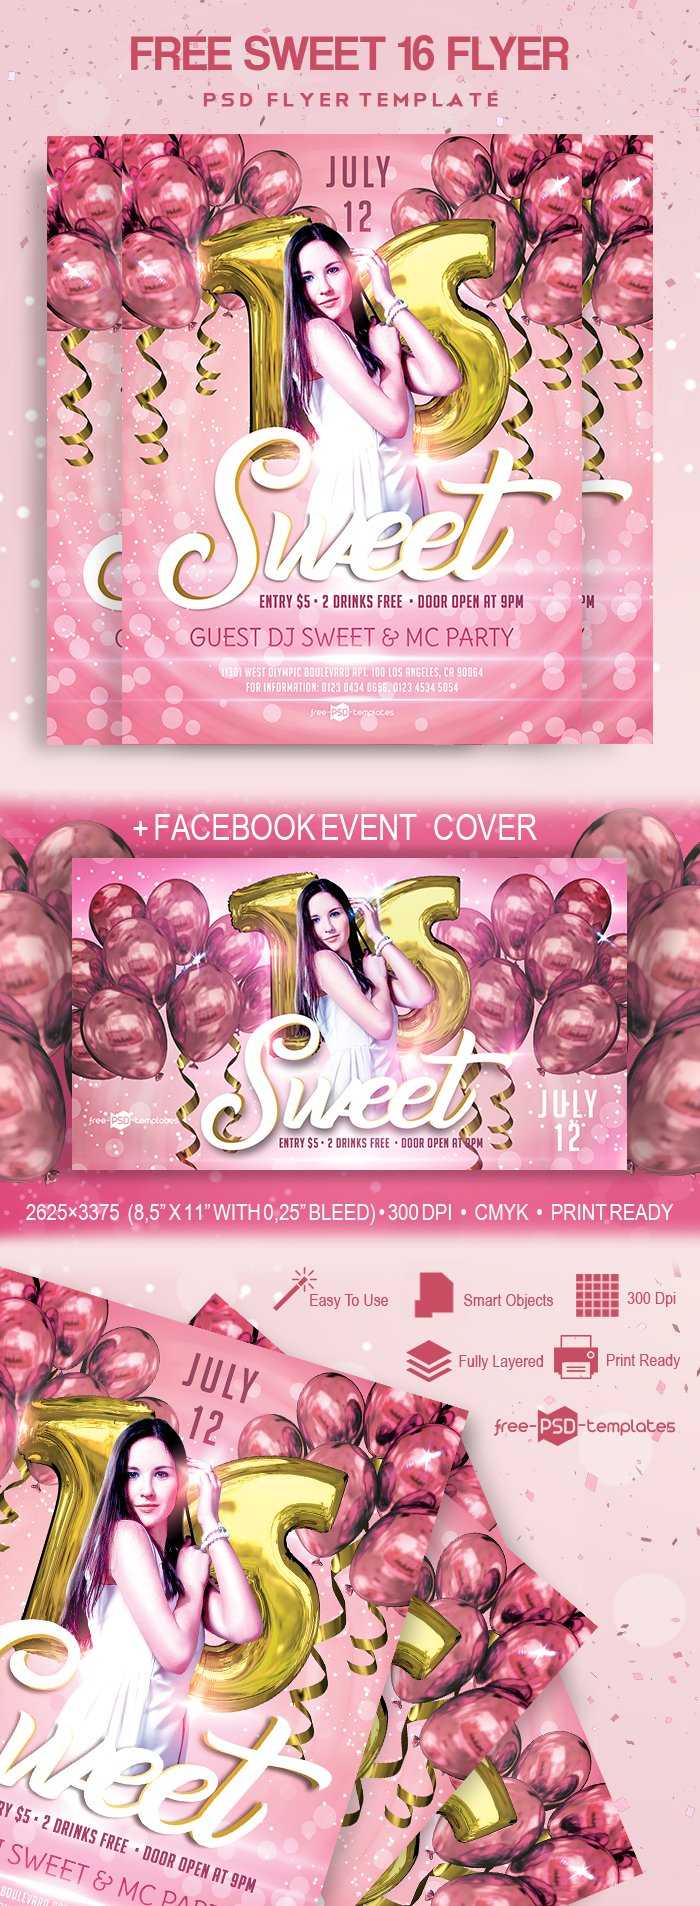 Free Sweet 16 Flyer In Psd | Free Psd Templates Throughout Sweet 16 Banner Template